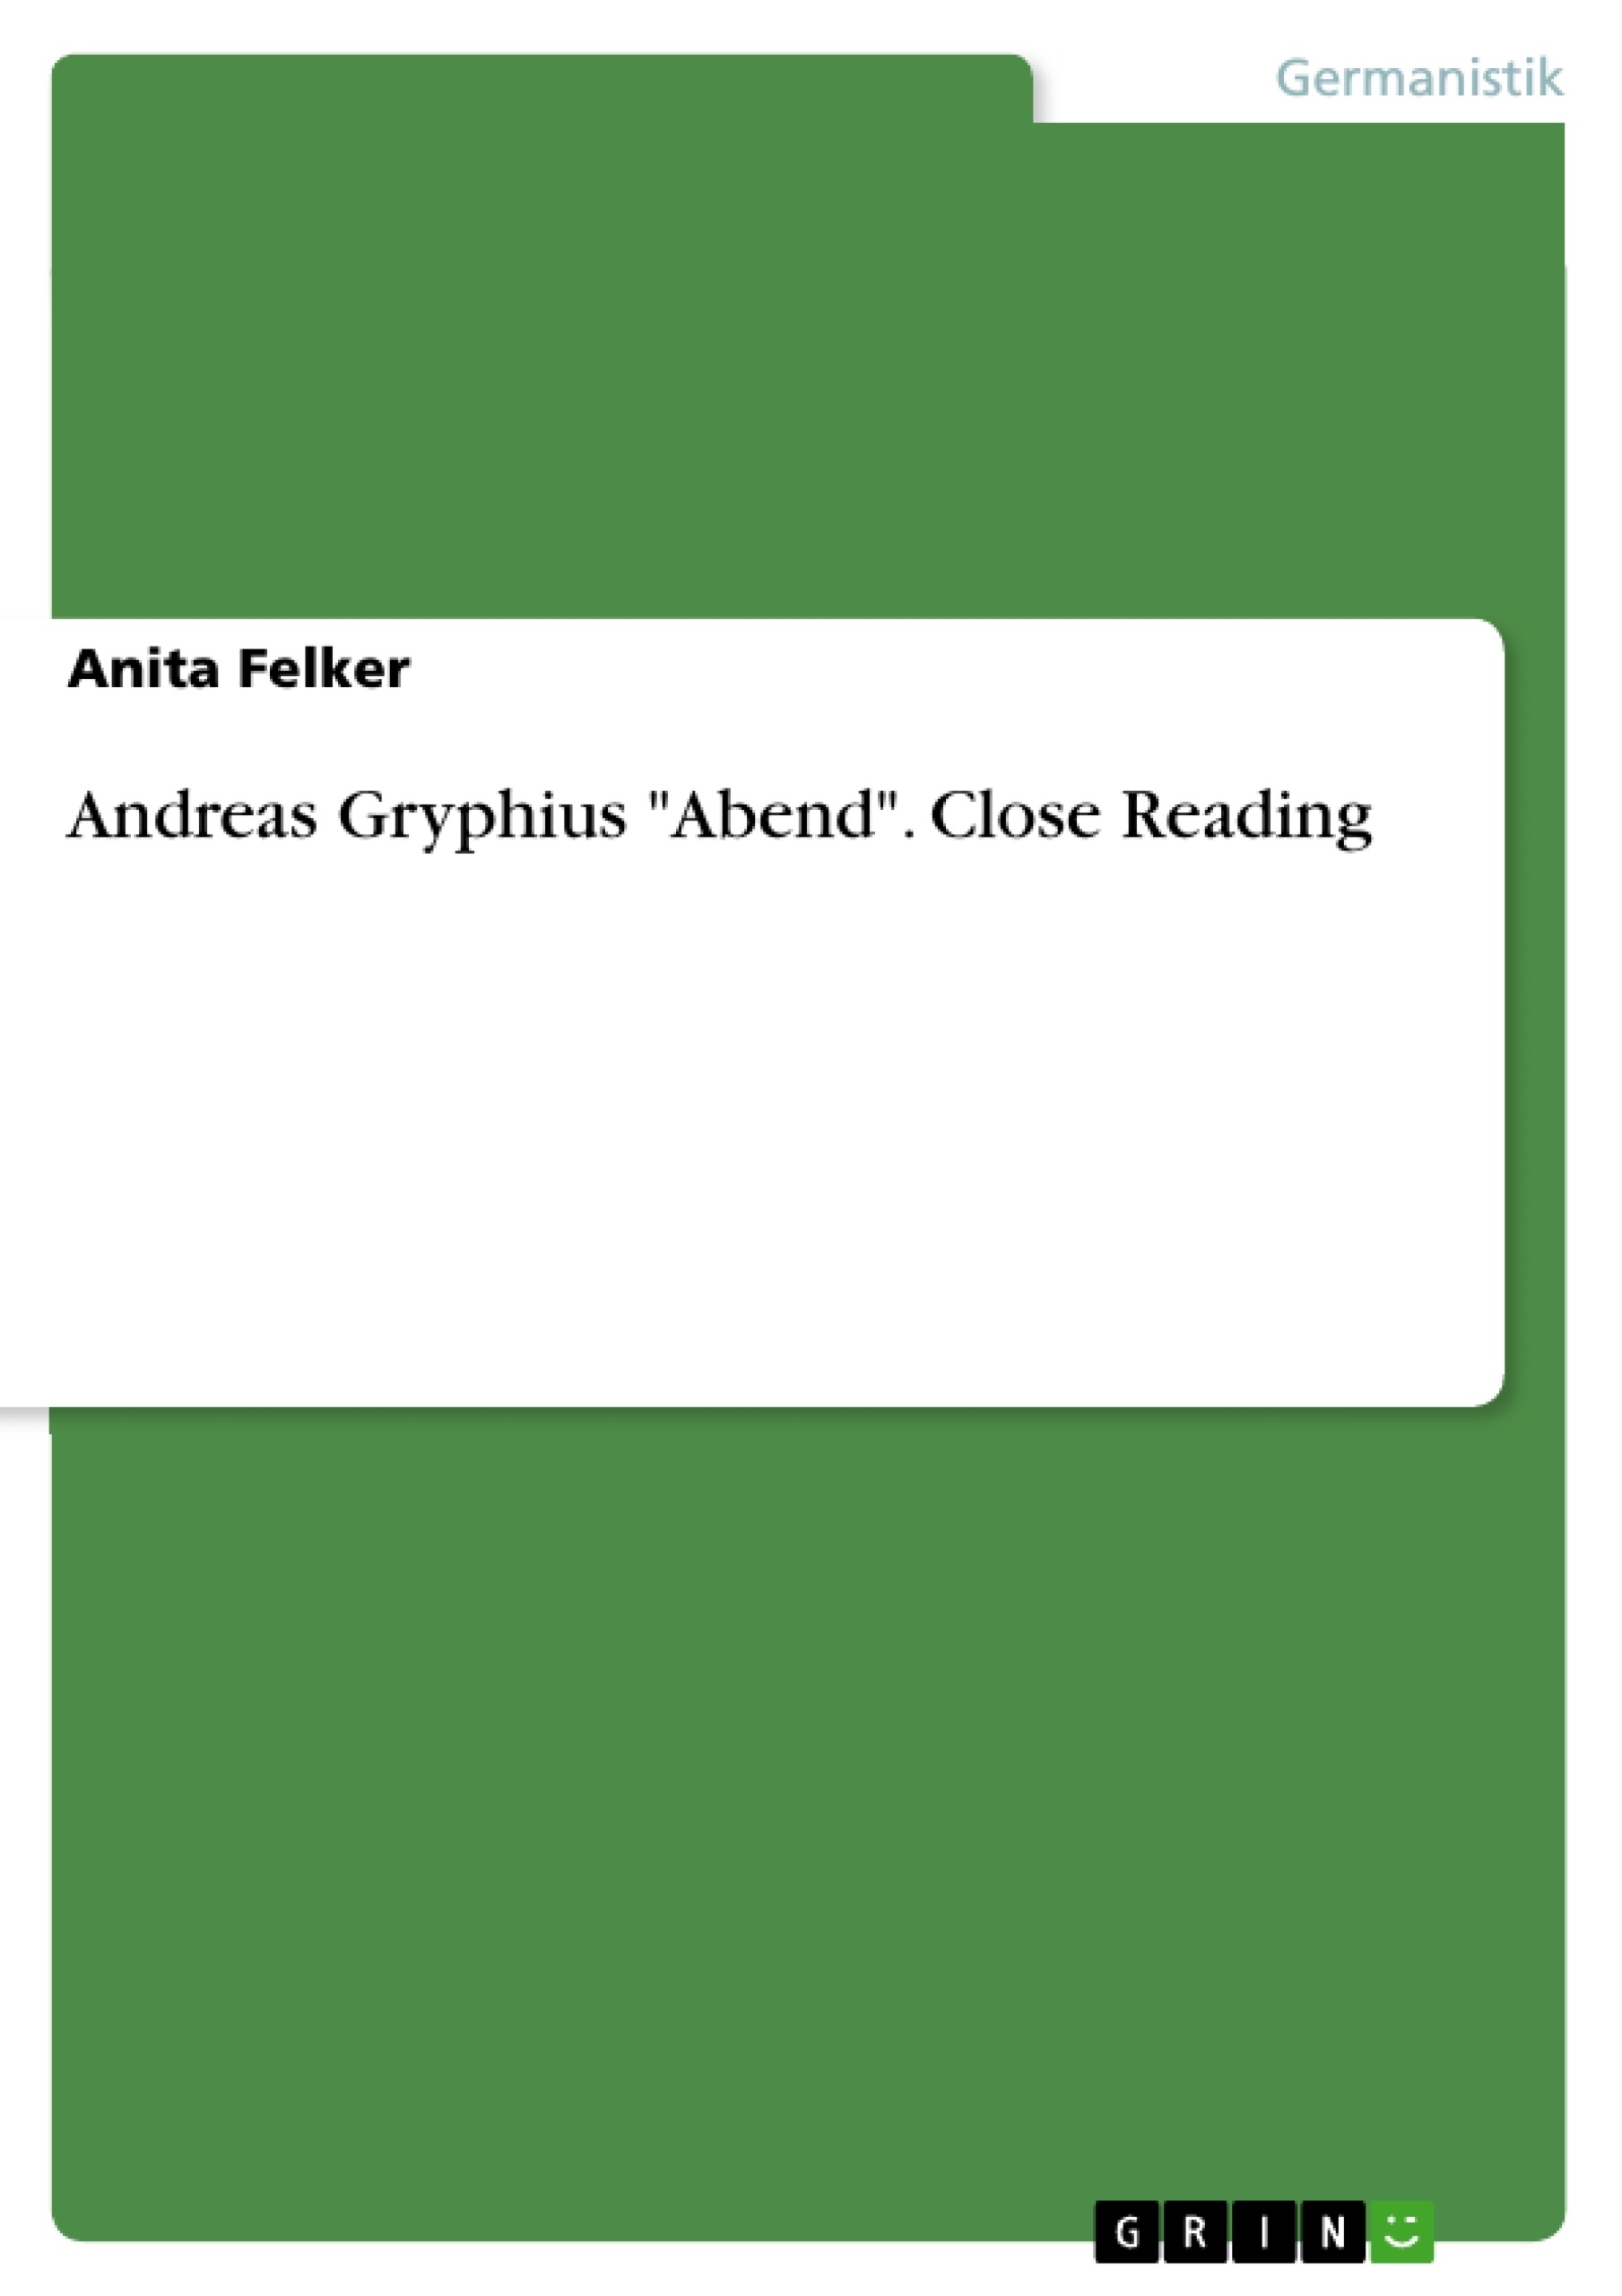 Titel: Andreas Gryphius "Abend". Close Reading